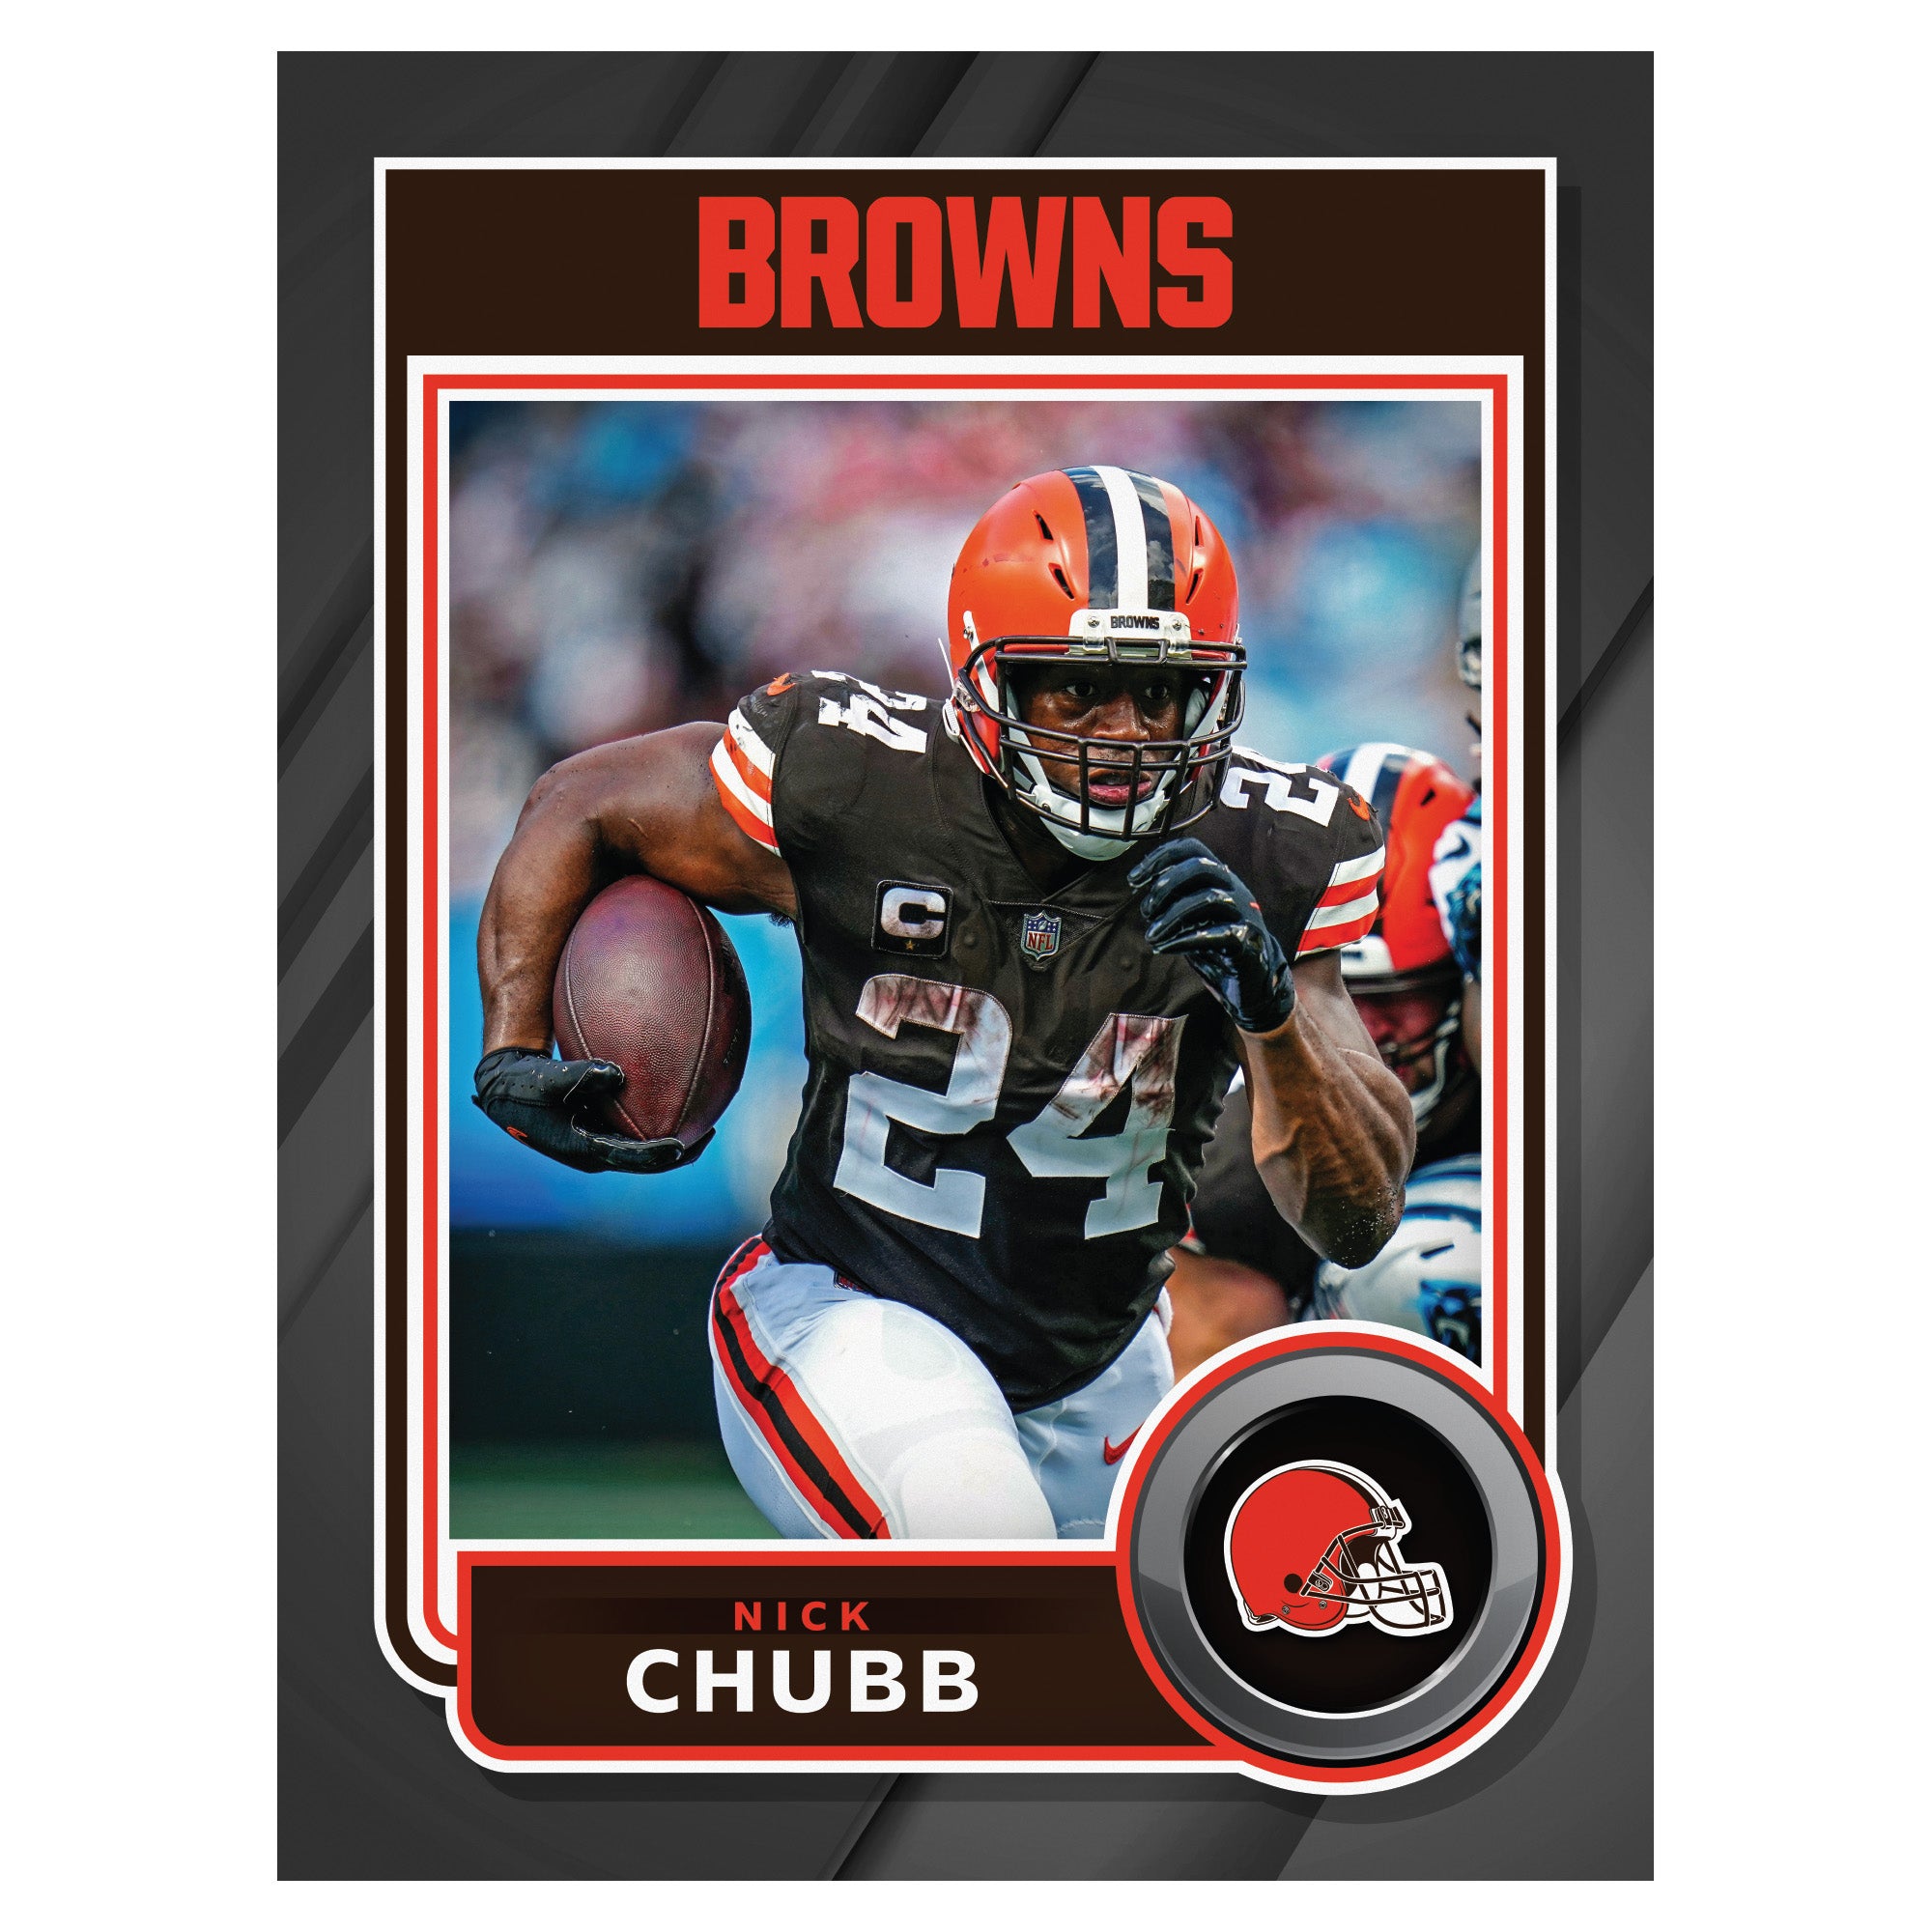 Fathead Collections Tagged Athlete Nick Chubb 